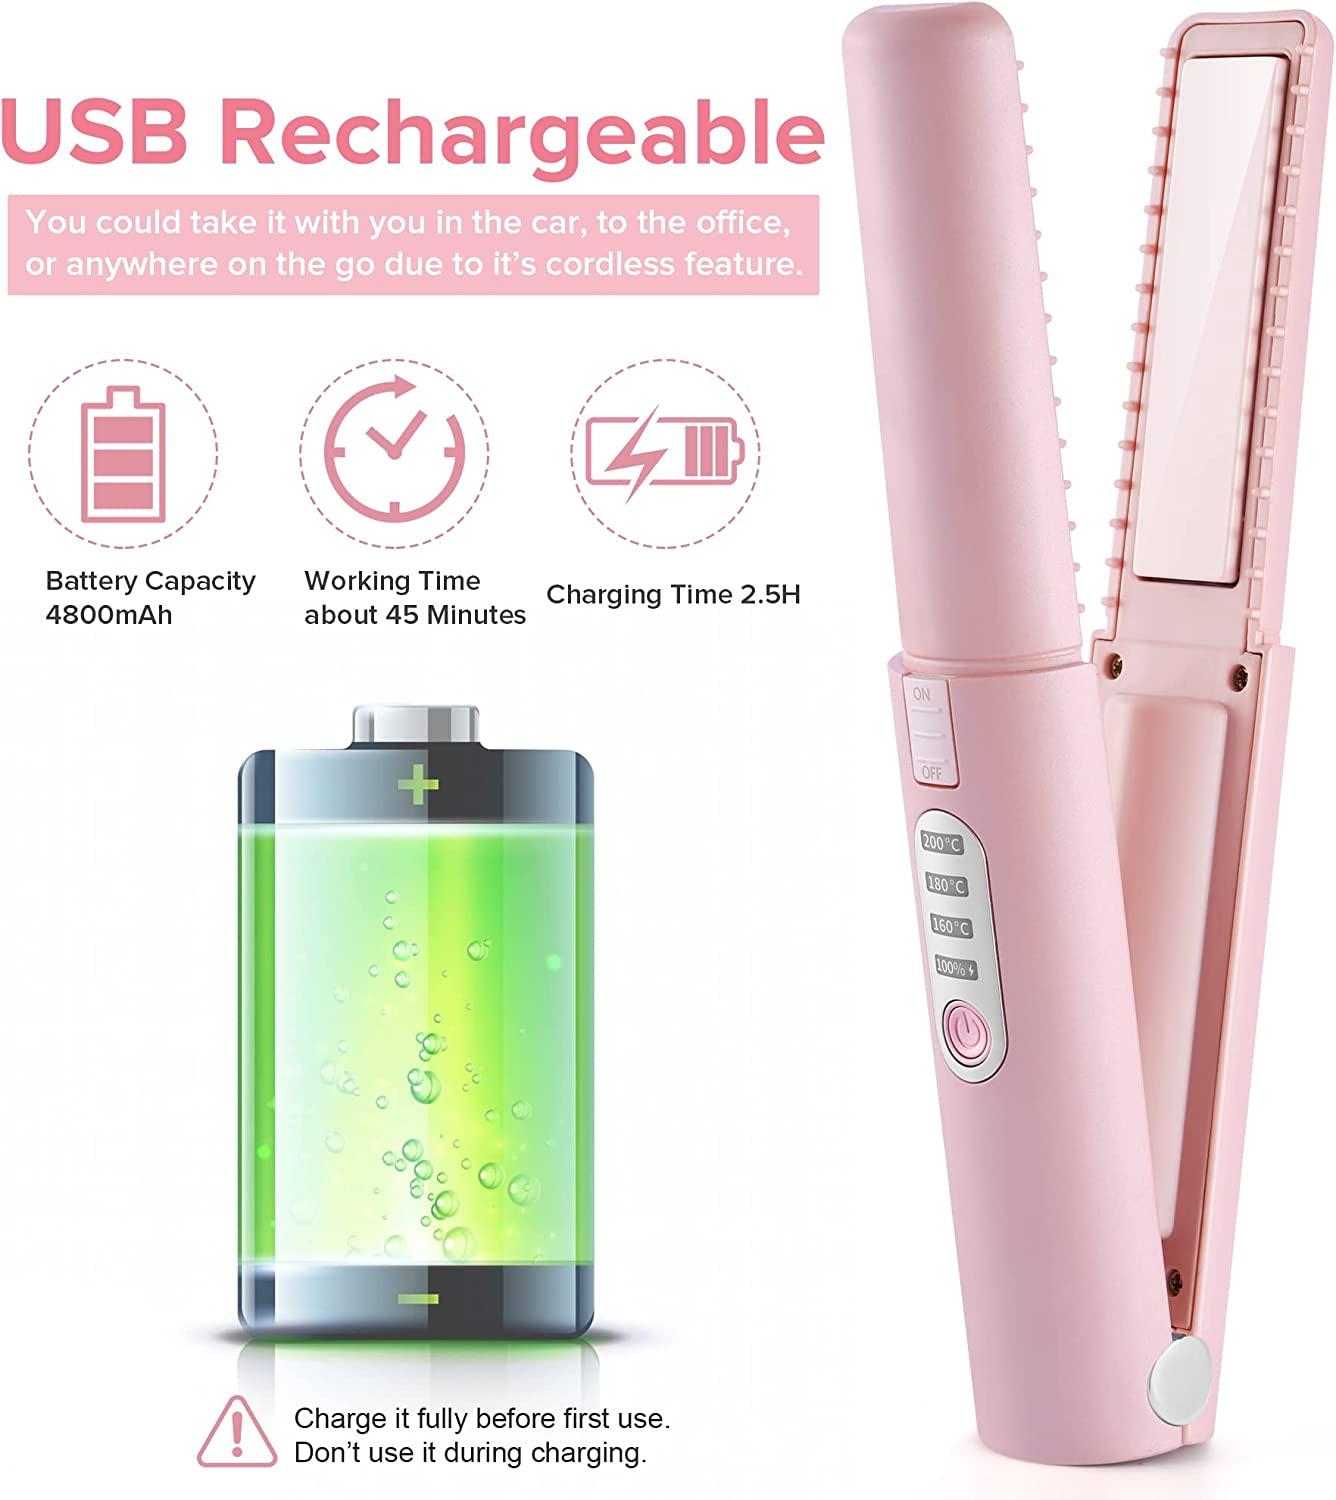 Hair Straightener (Upgraded), Cordless Straightener, Wireless Flat Iron for  Hair, USB-C Rechargeable Ceramic Mini Flat Iron with 4800mA Battery,  Adjustable Temperature, Travel Size (Pink)